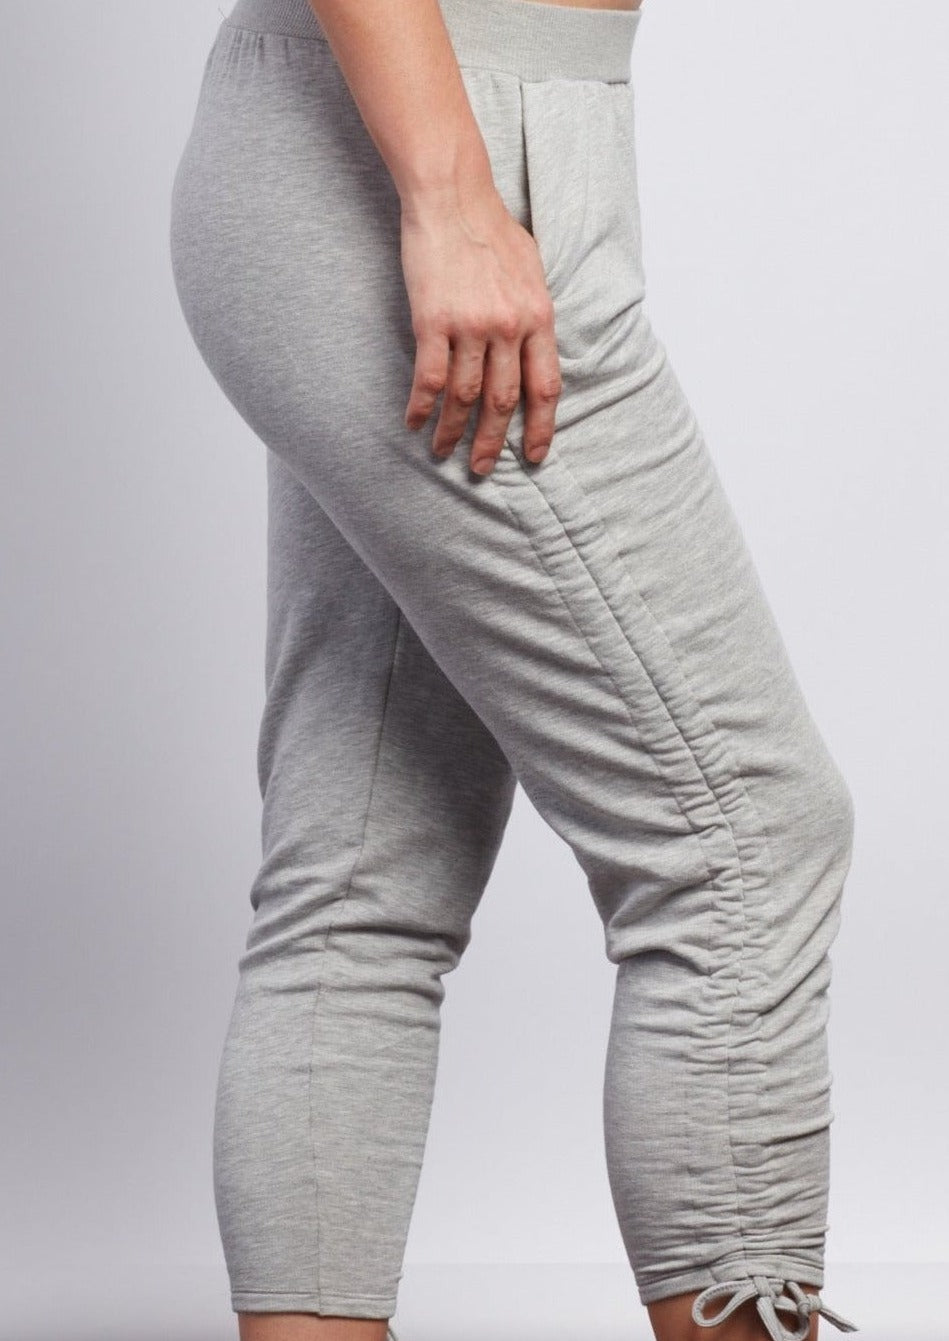 Heather Grey Leah Pants - Haven Collective